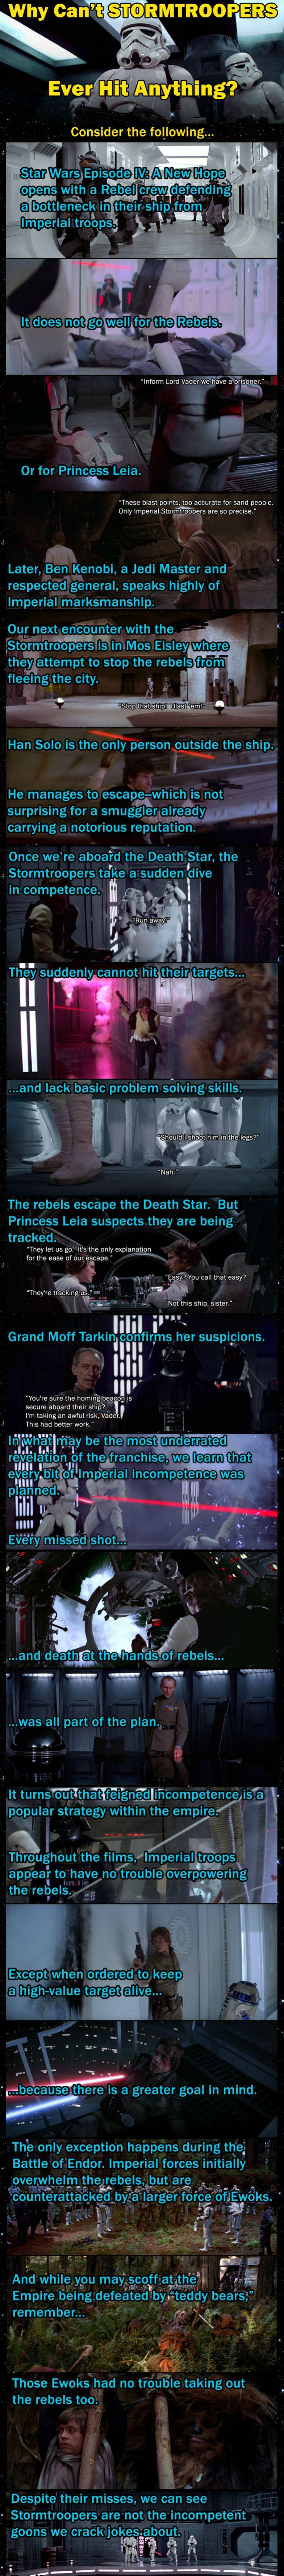 Starwars Why Cant Stormtroopers Ever Hit Anything Inforgraphic